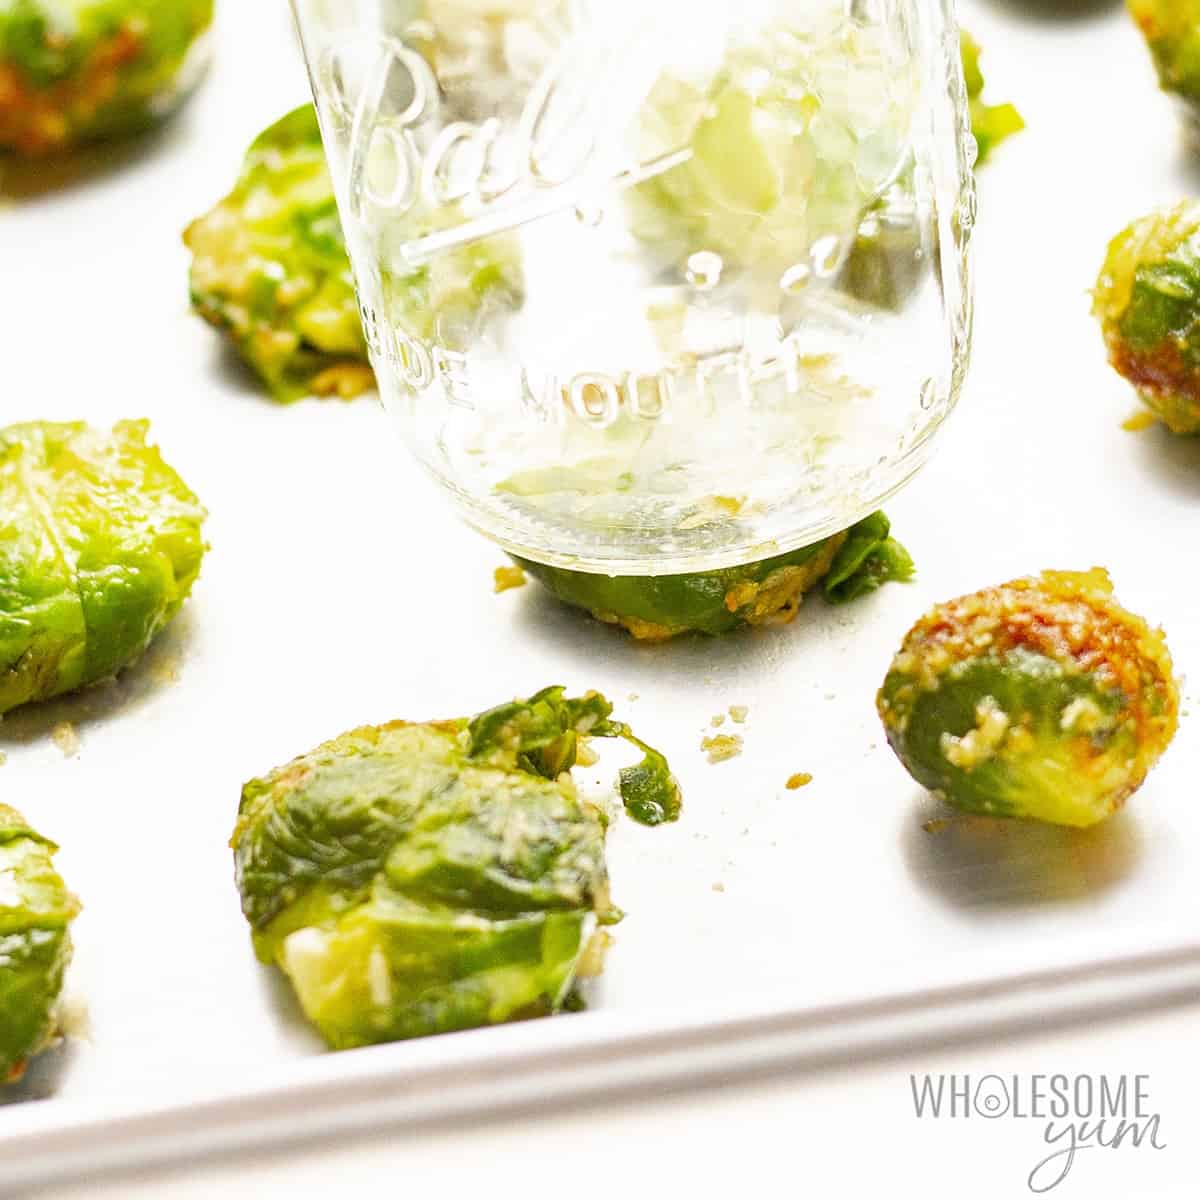 Brussels sprouts smashed under a glass mason jar